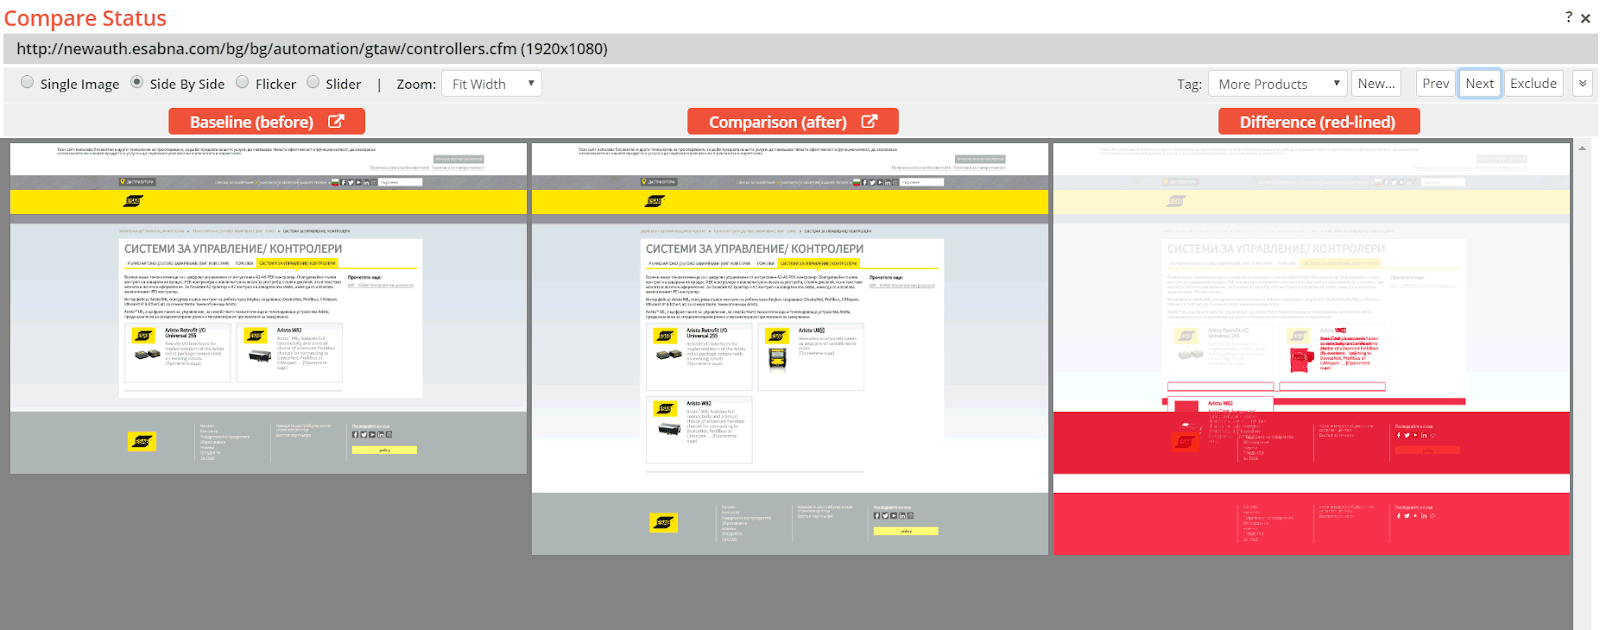 A submenu item beneath the ESAB yellow banner was not rendered correctly